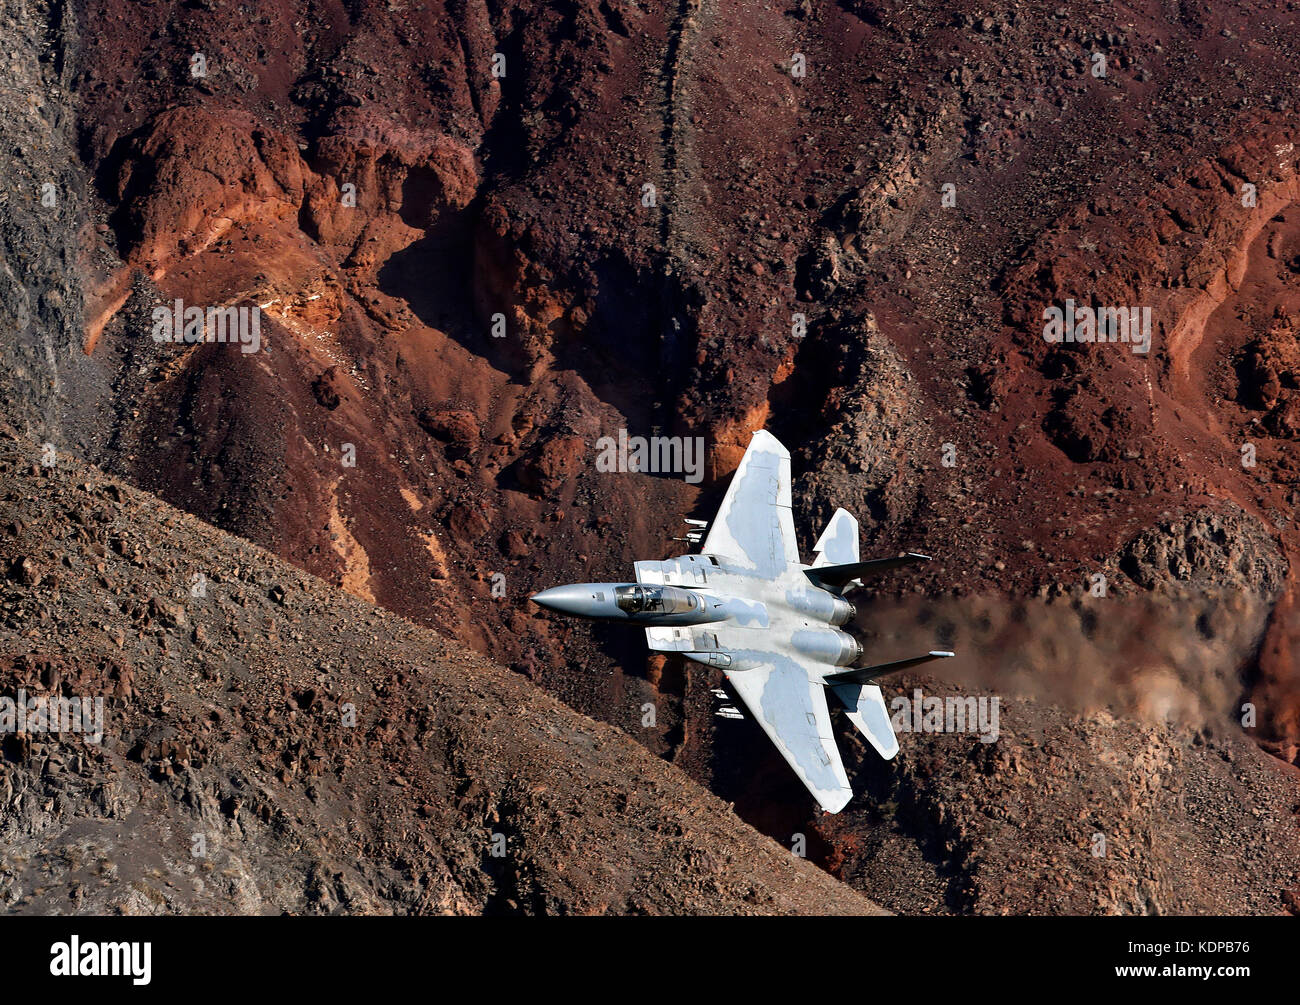 F-15 with the 144th fighter wing Air National Guard from Fresno, California, fly through Jedi transition in Death Valley National Park, California. Stock Photo